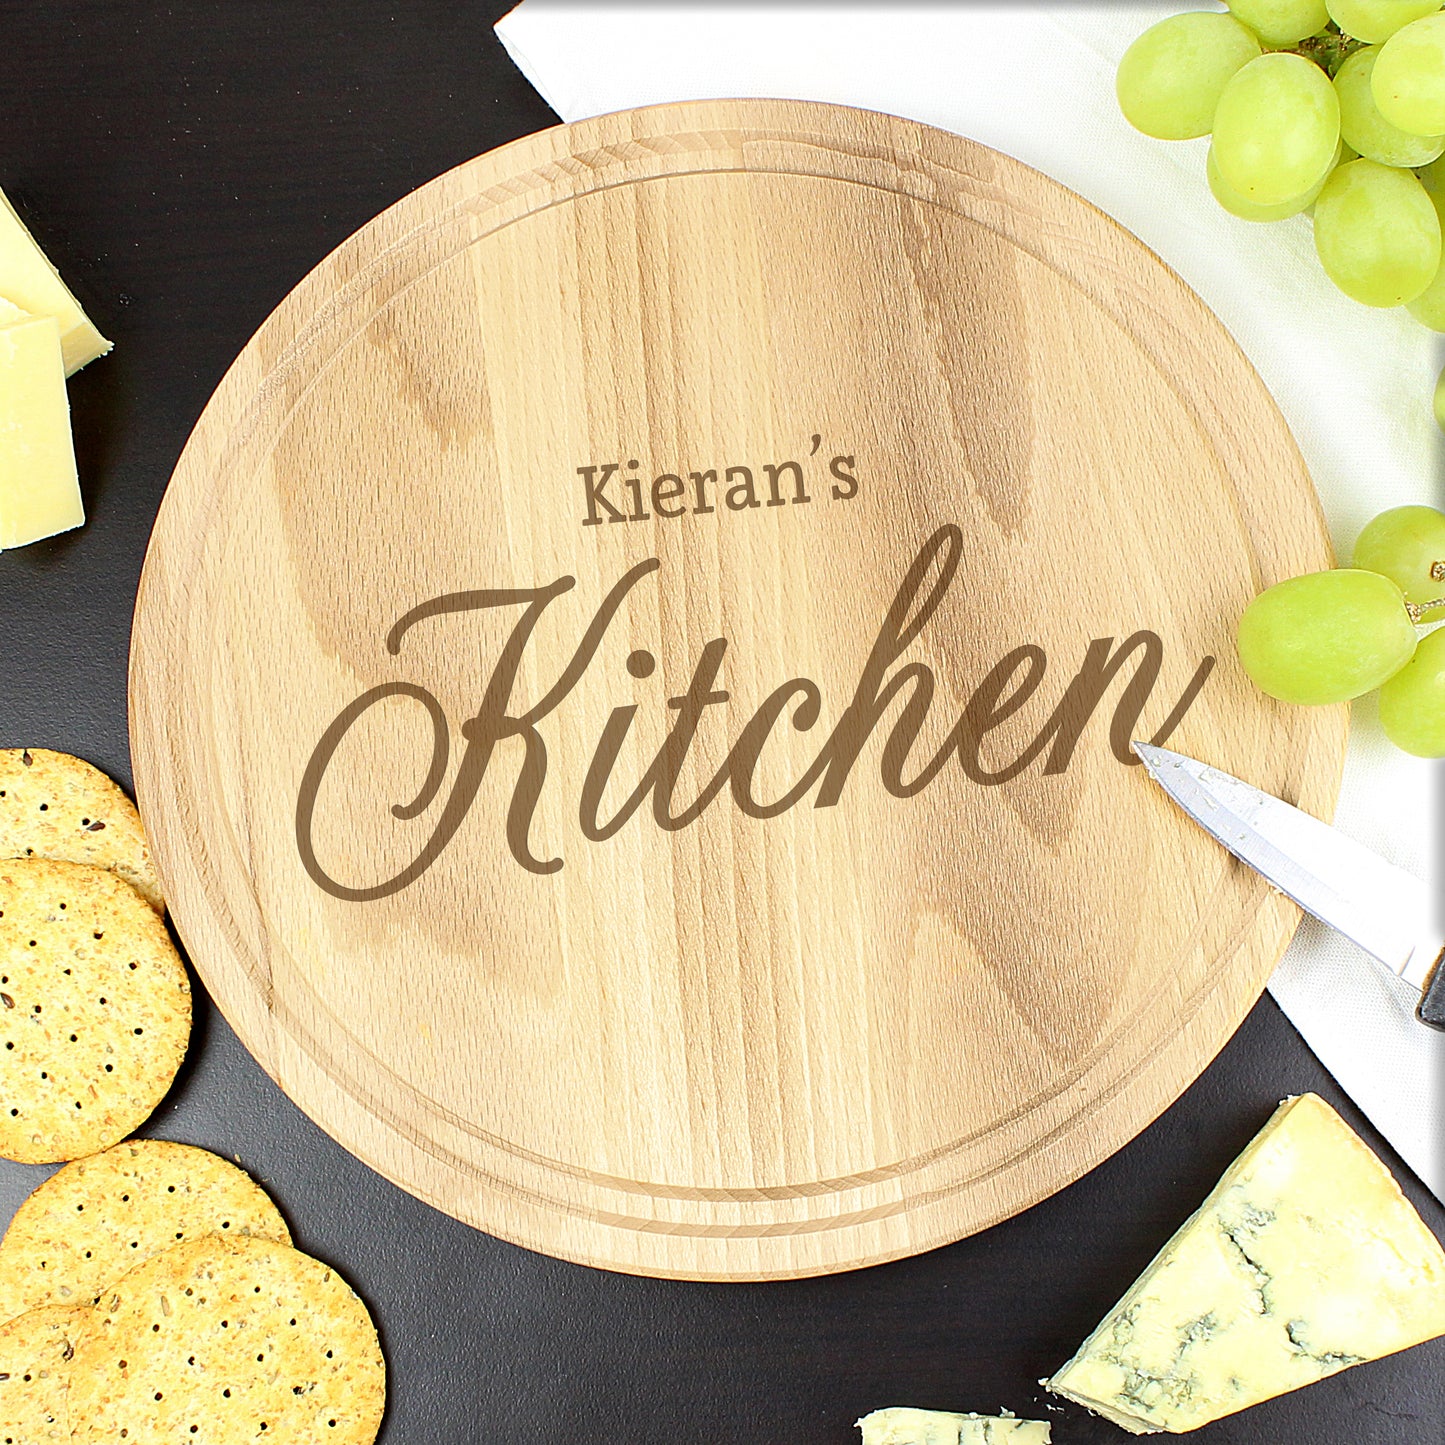 Personalised Chopping Board - Kitchen